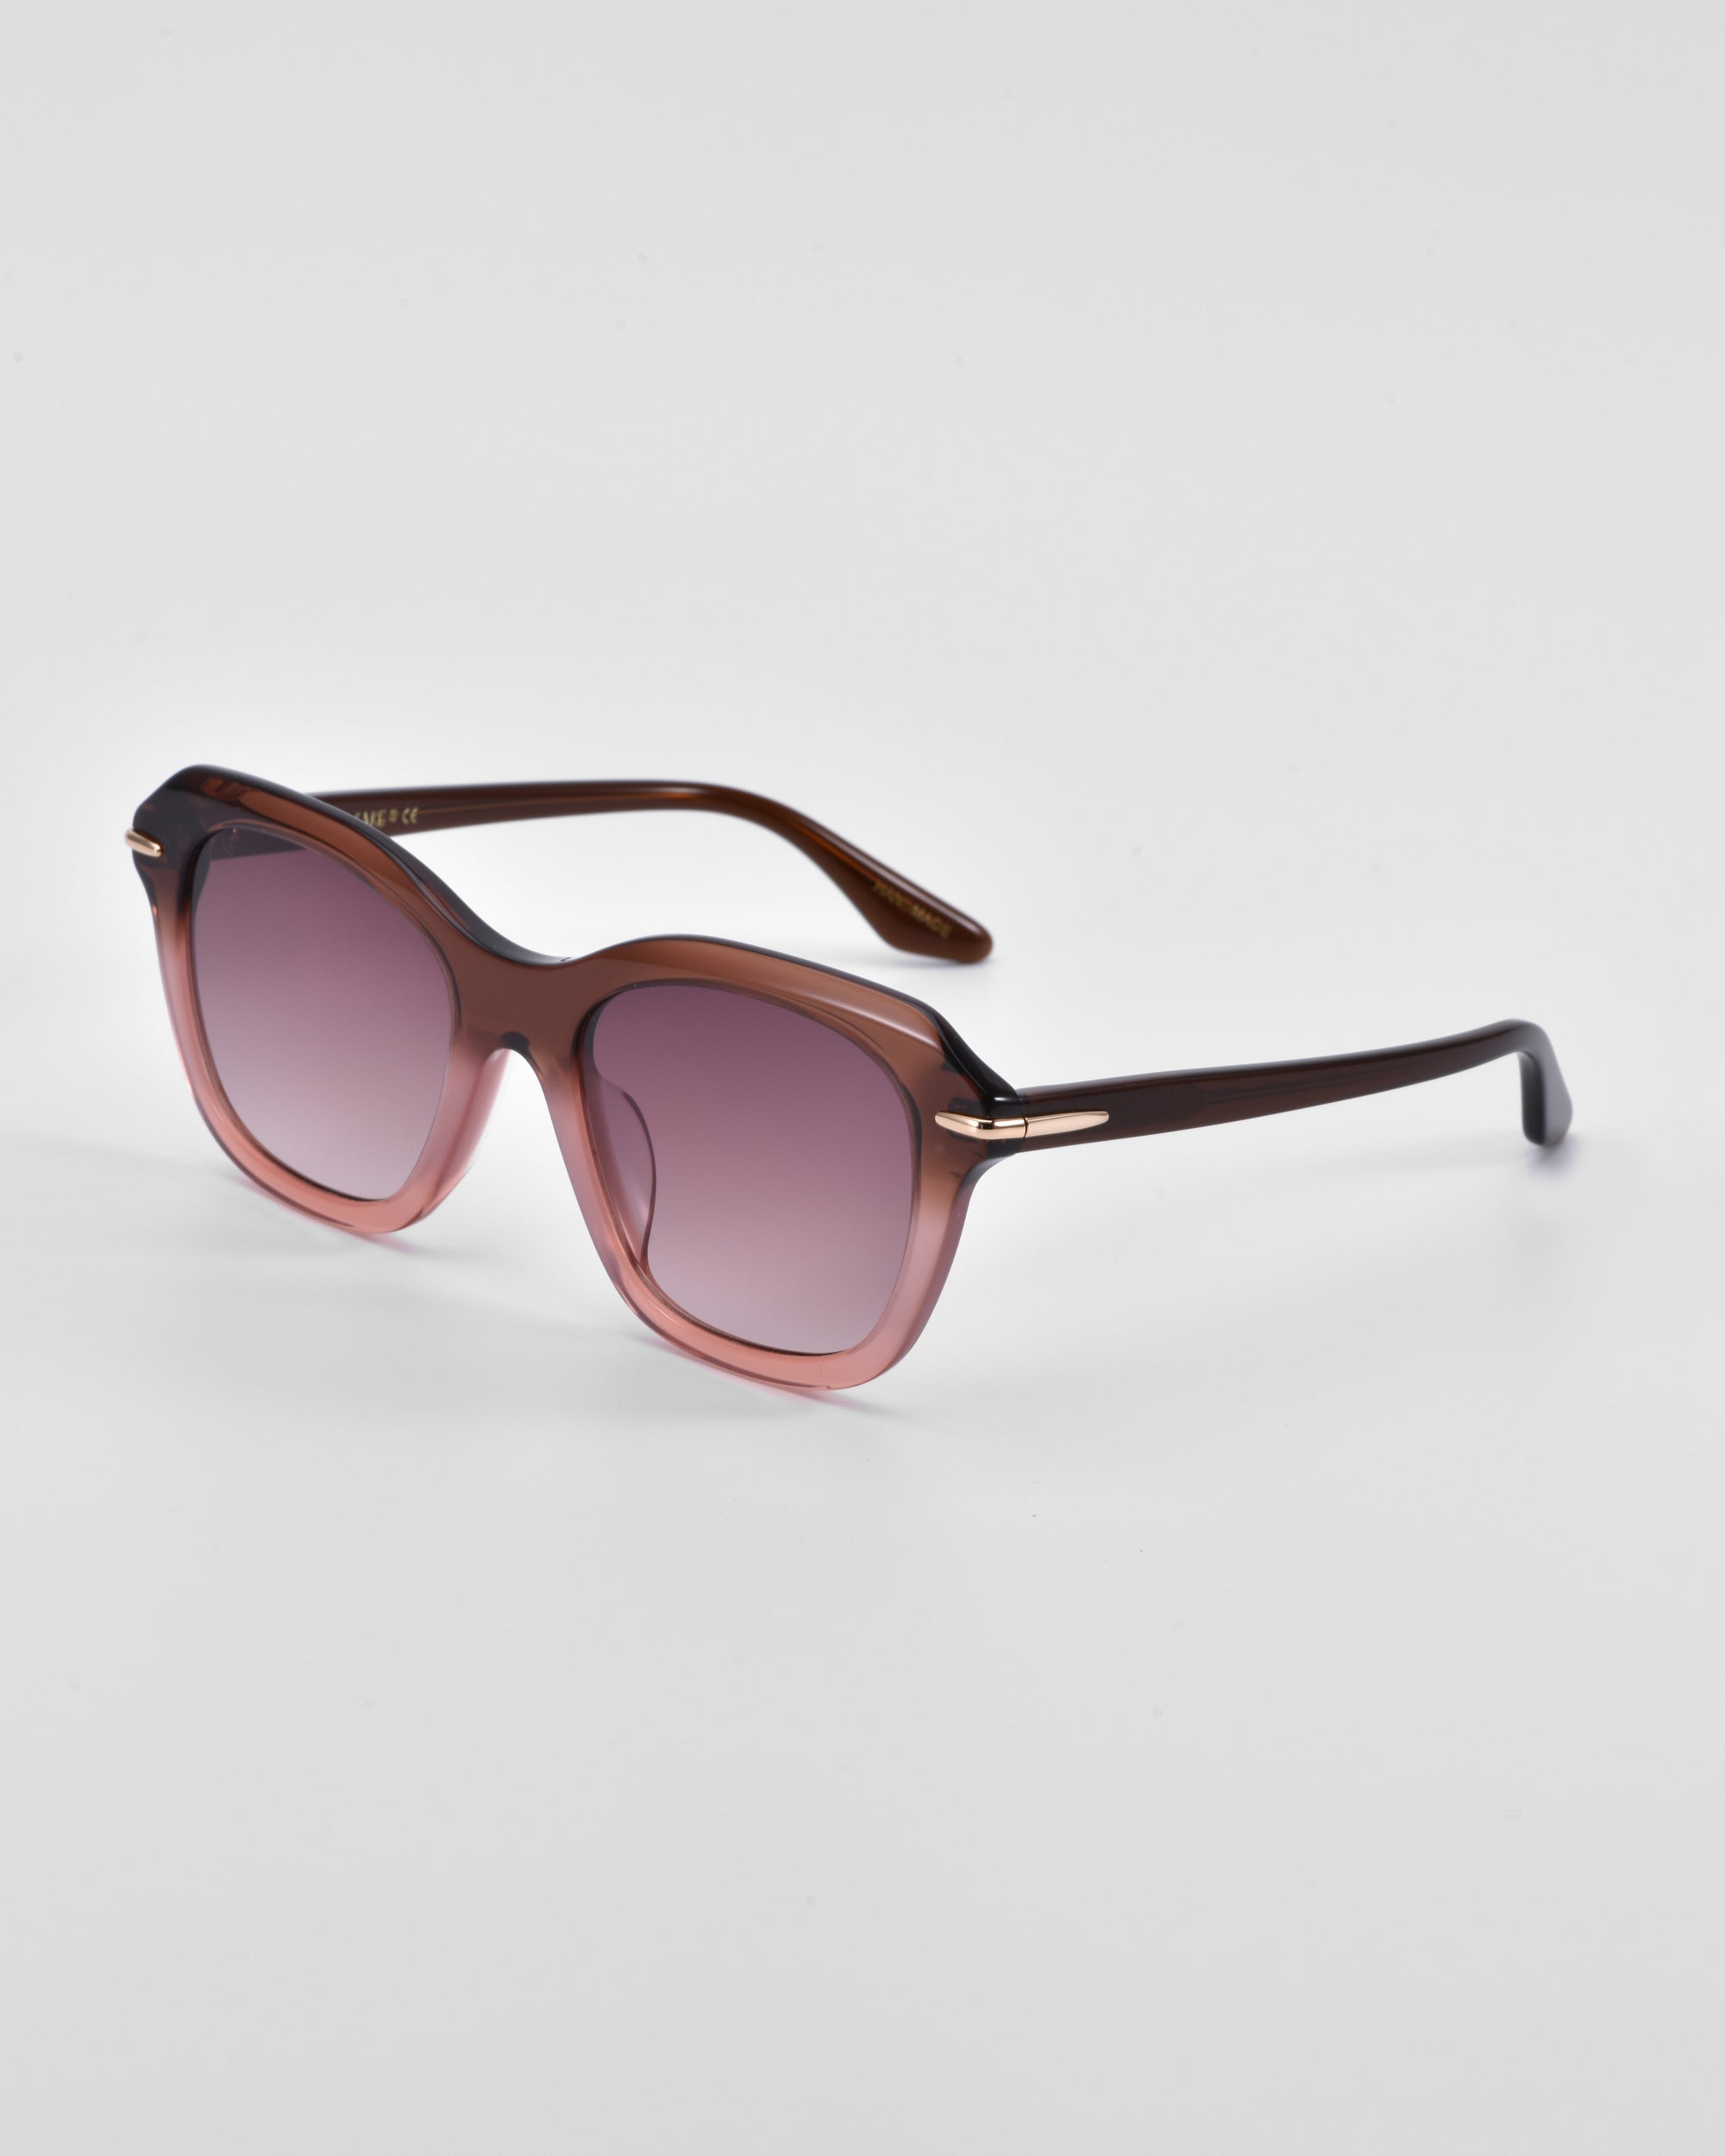 A pair of oversized cat-eye sunglasses with gradient lenses that transition from dark to light pink. The frame is a sleek, dark brown with 18-karat gold plating near the hinges. The design is chic and modern, making it a true statement piece suitable for both casual and formal wear. Introducing &quot;Helene&quot; by For Art&#39;s Sake®.